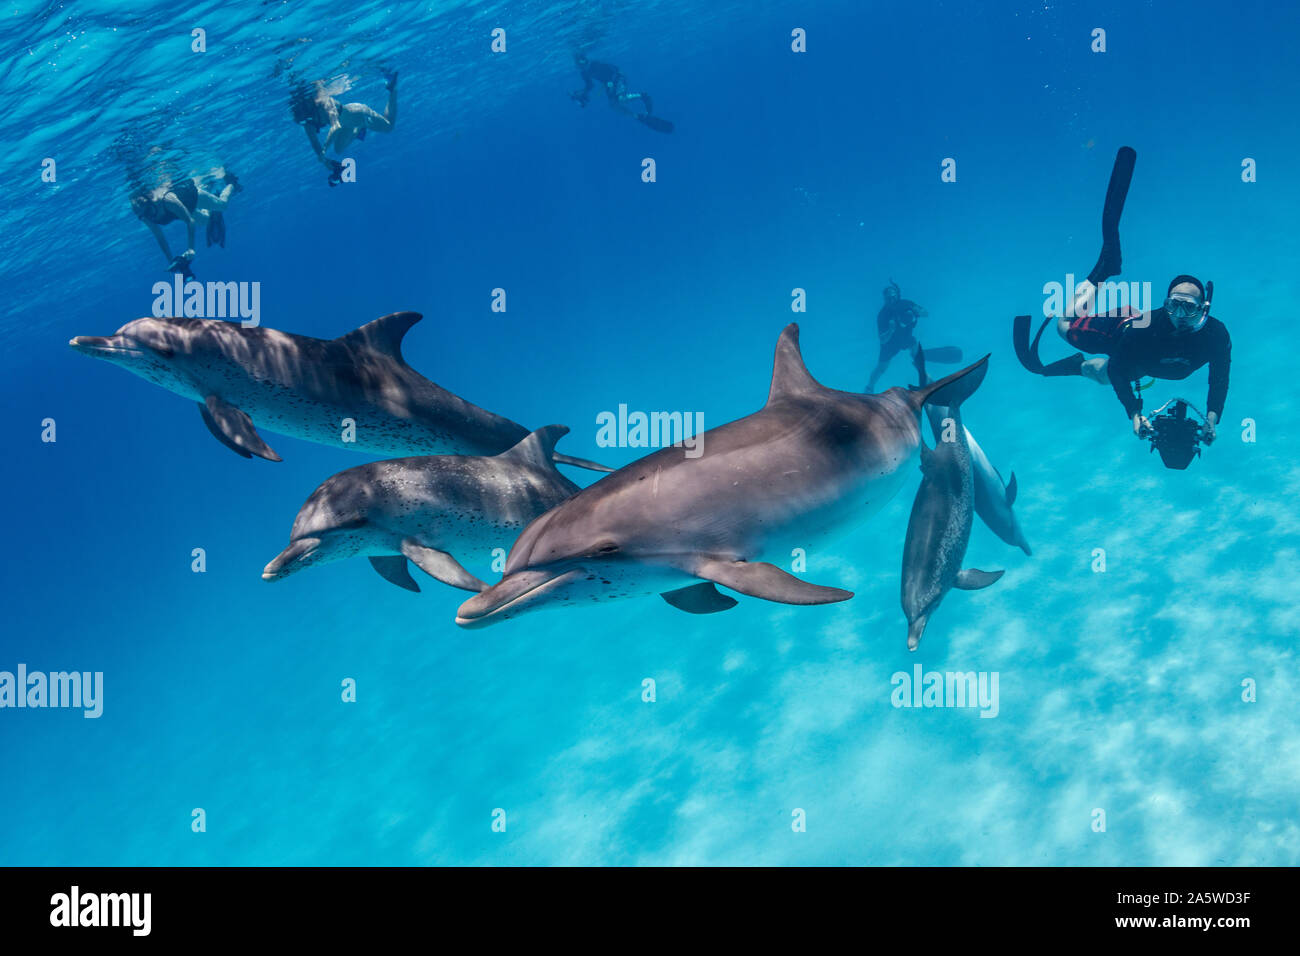 A pod of friendly Atlantic spotted dolphins (Stenella frontalis) swims through a group of snorkelers with underwater cameras in the waters of the Baha Stock Photo